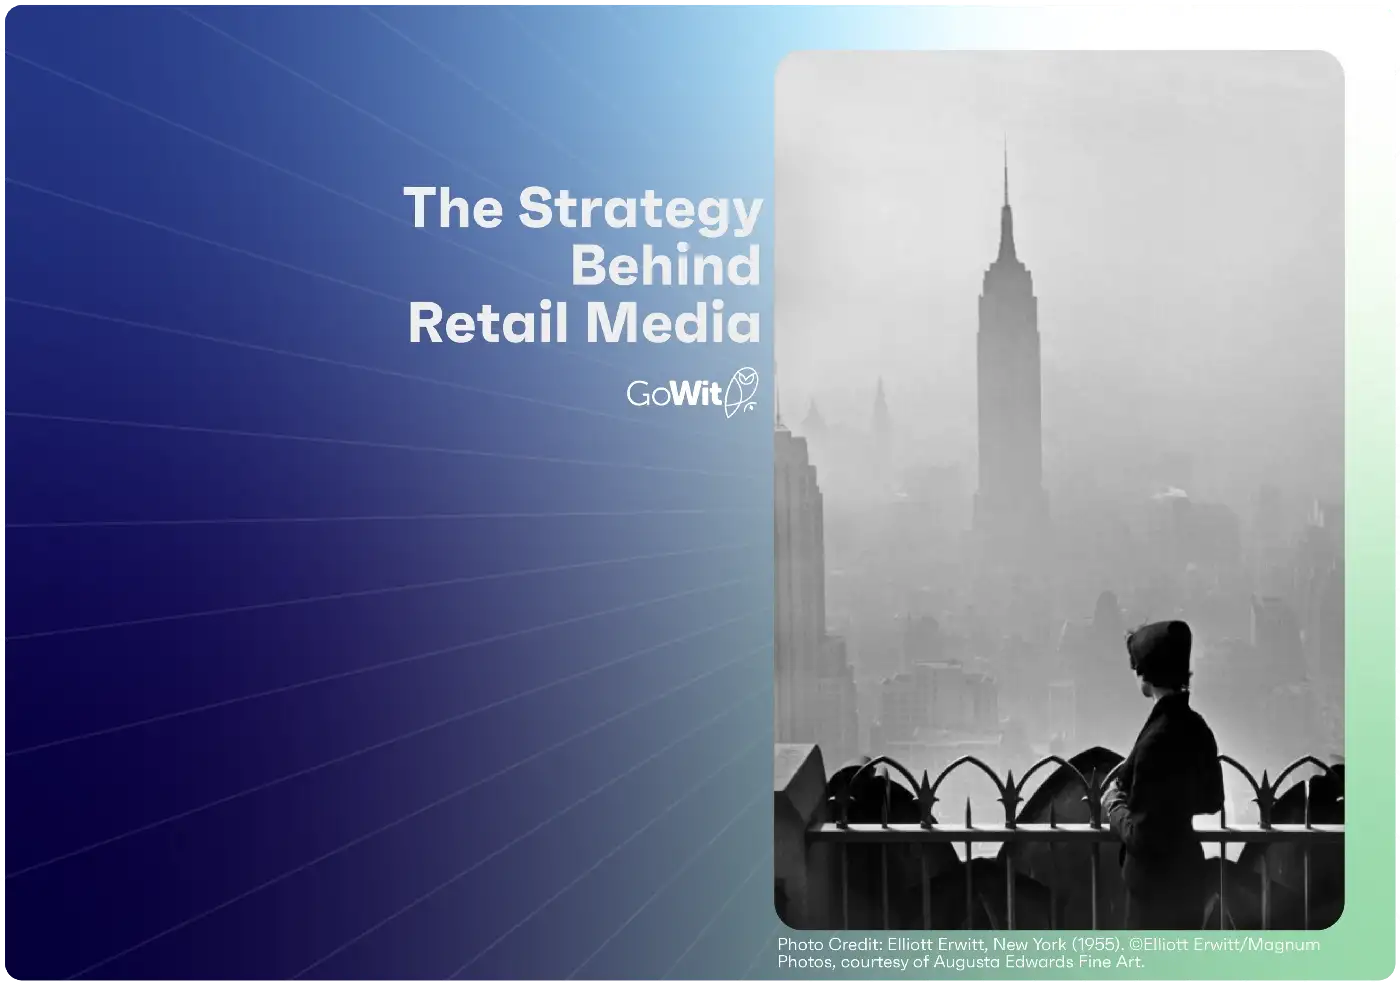 The Strategy Behind Retail Media